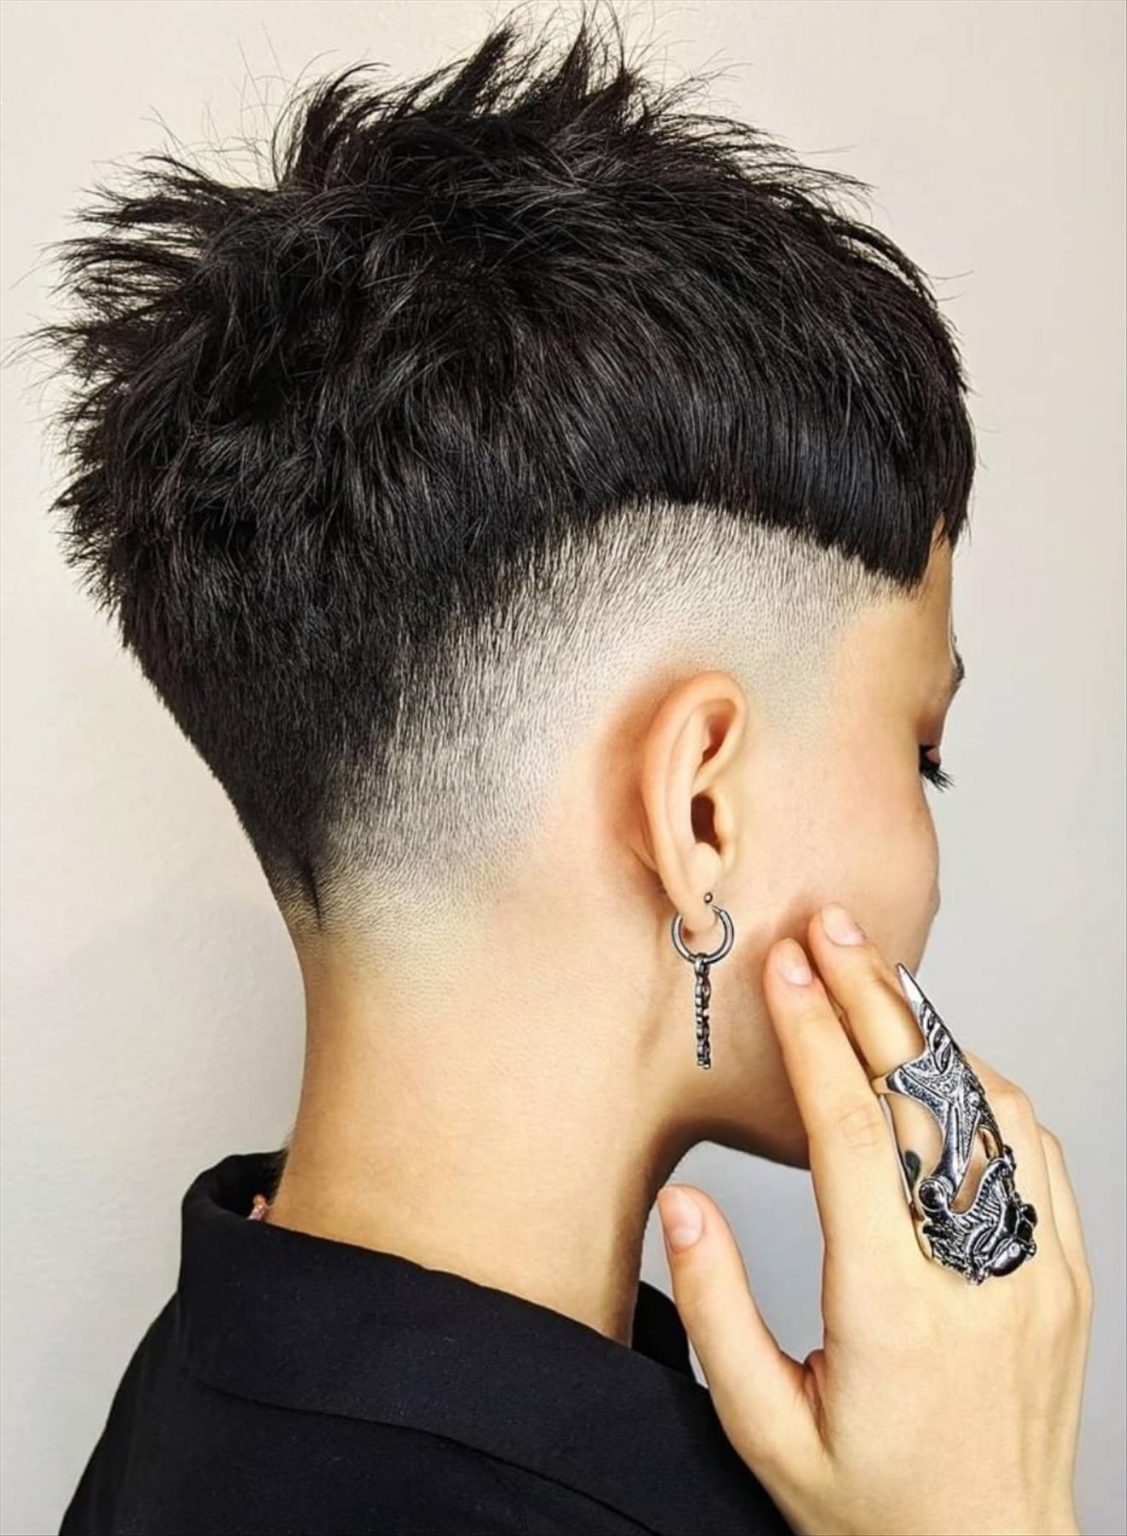 32 Cool short pixie hairstyles for women 2022 - Mycozylive.com